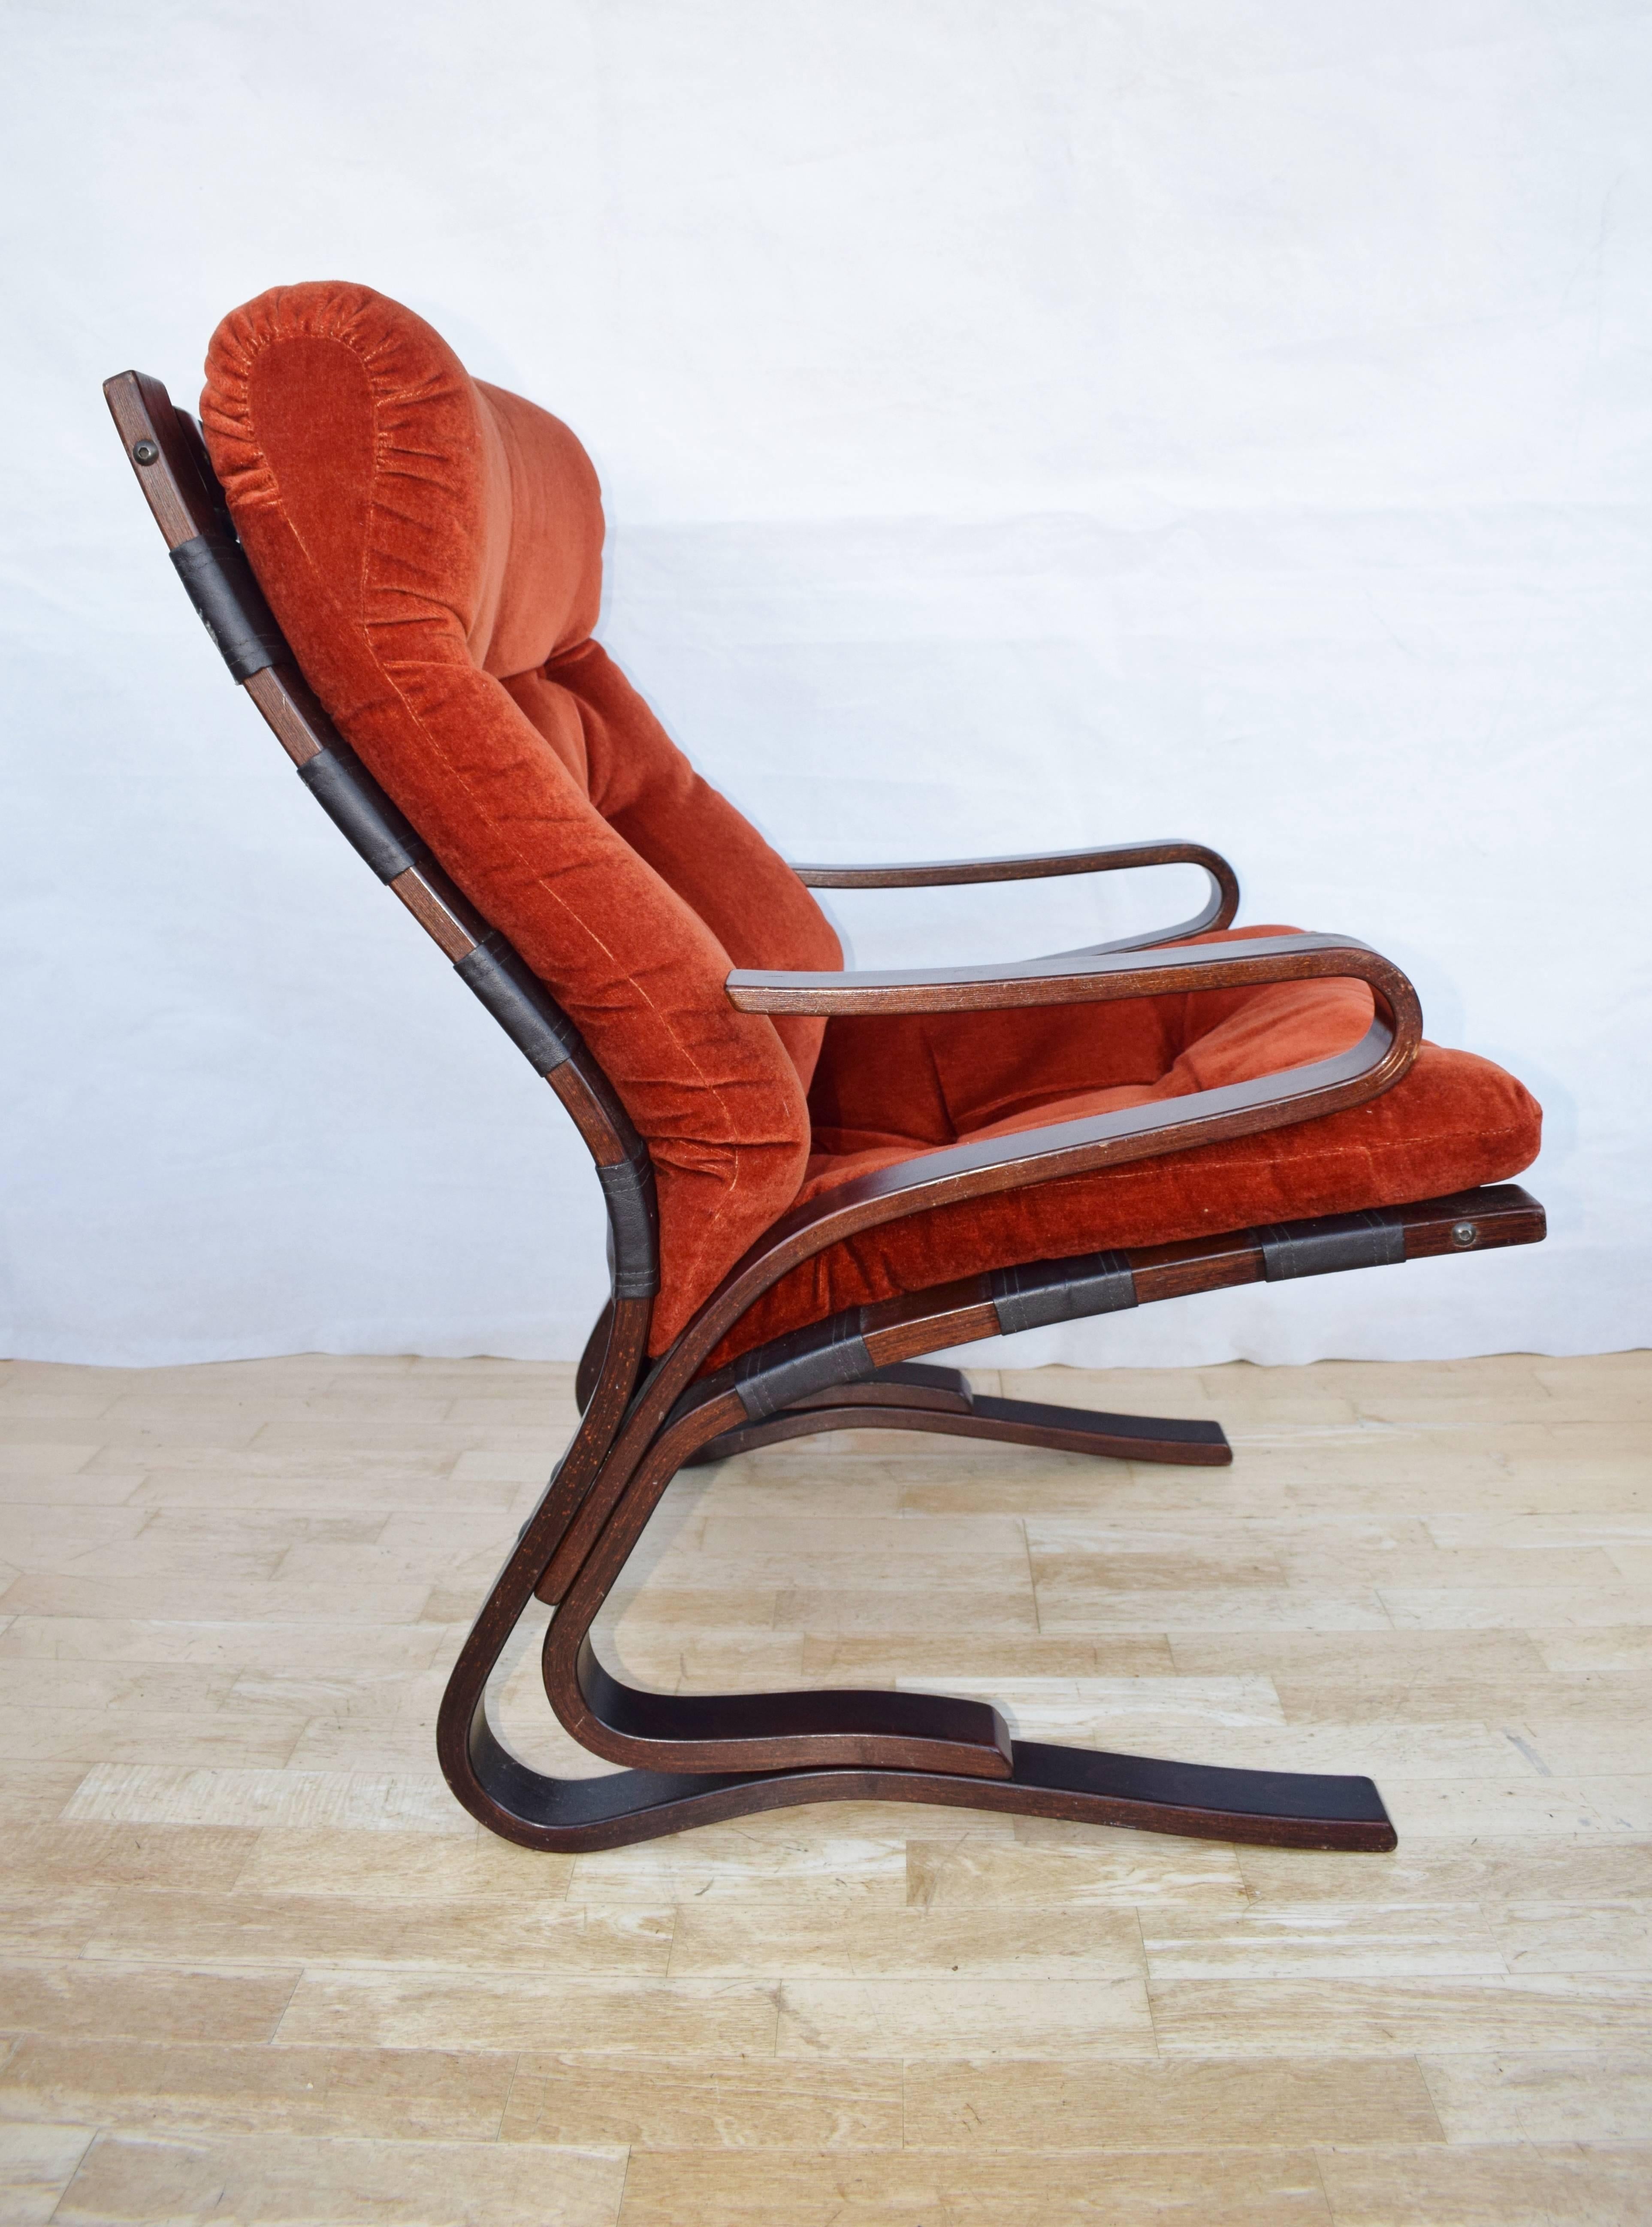 Designer: Norwegian Design.

Manufacturer: Westnofa.

Country: Norway.

Date: 1960s.

Material: Red Draylon upholstery with beech frame.

Maximum Dimensions: Width 66cm, depth 80cm, height 93cm and seat height 46cm.

Condition: Excellent